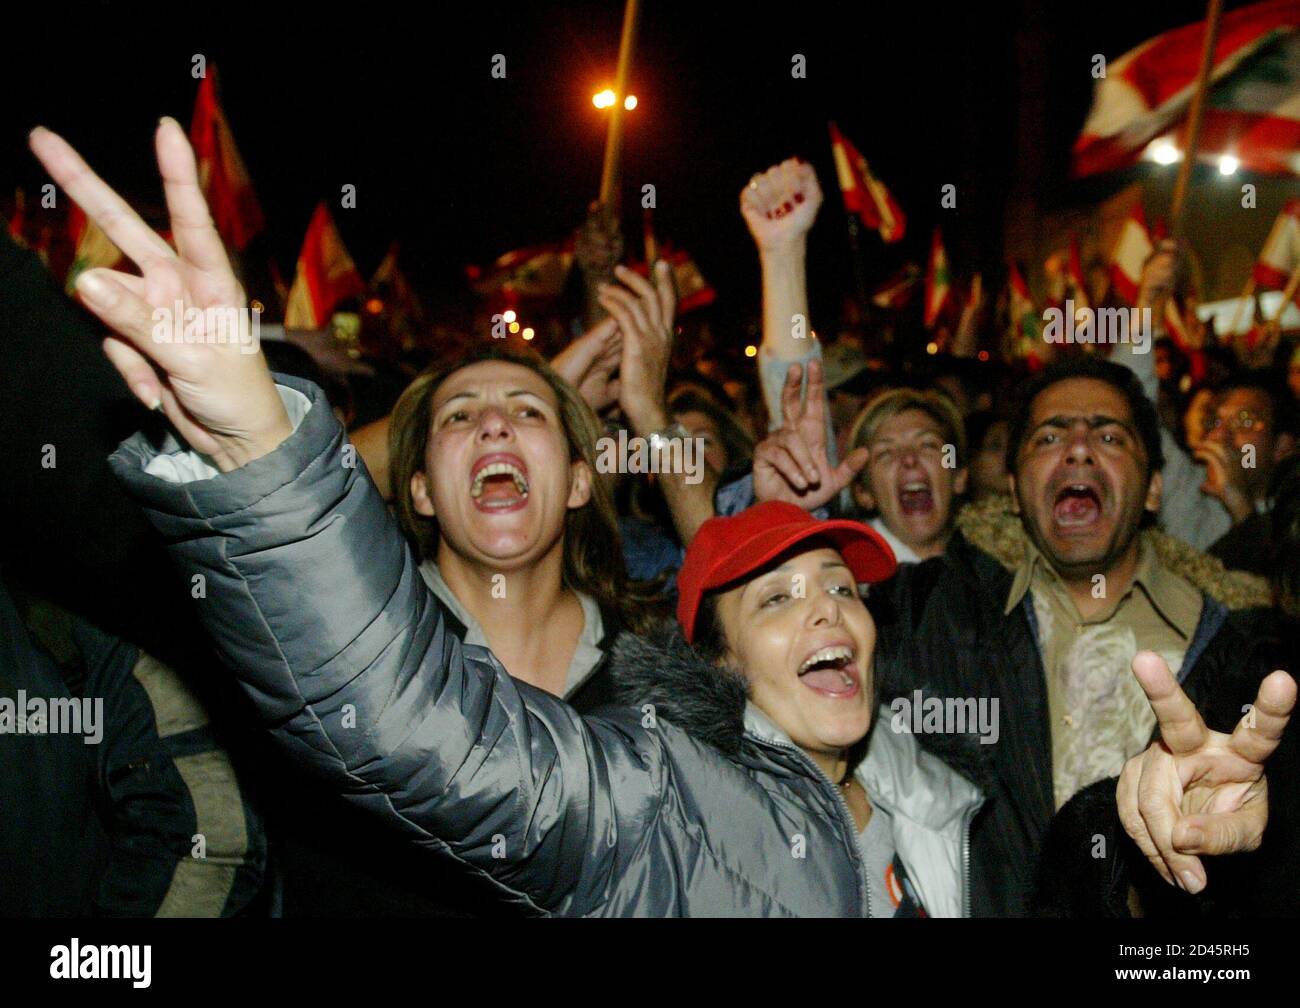 Lebanese protesters celebrate after Prime Minister Omar Karami resign in Beirut February 28, 2005. Lebanon's Syrian-backed Prime Minister Omar Karami,under popular pressure after assassination of an ex-prime minister,said on Monday his government was resigning. REUTERS/Mohamed Azakir  JS/THI Stock Photo